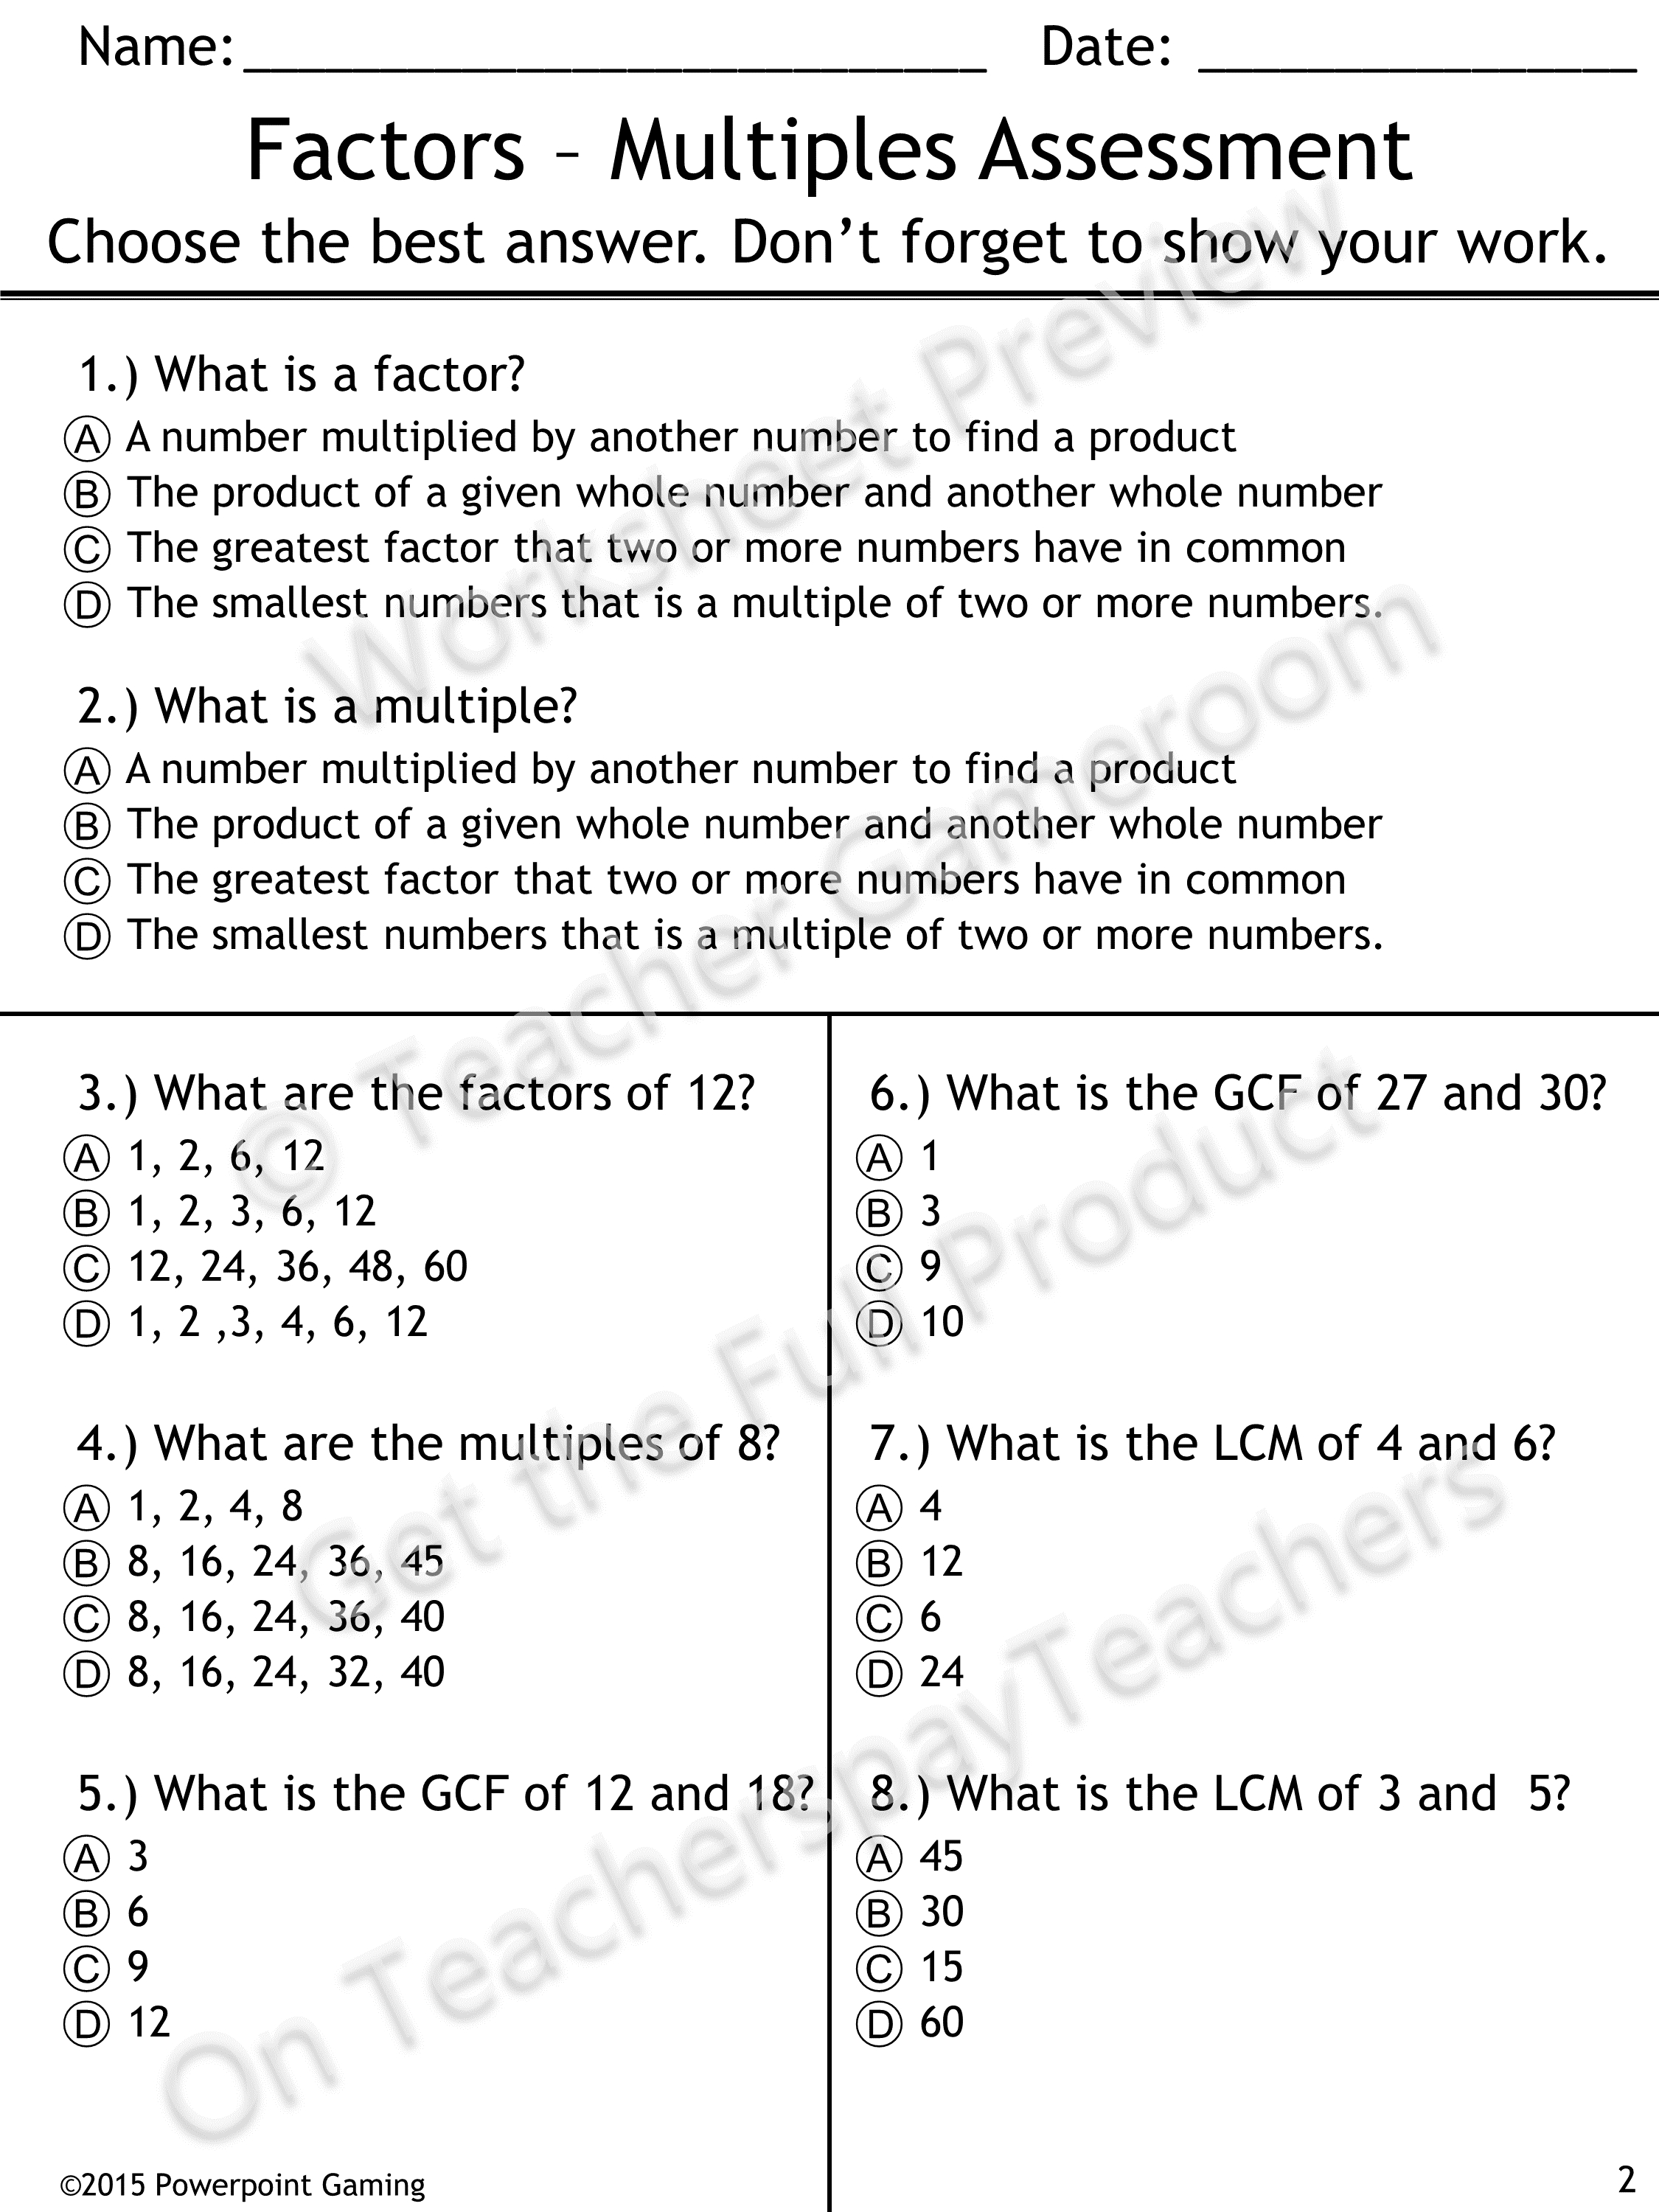 factors-worksheet-with-answers